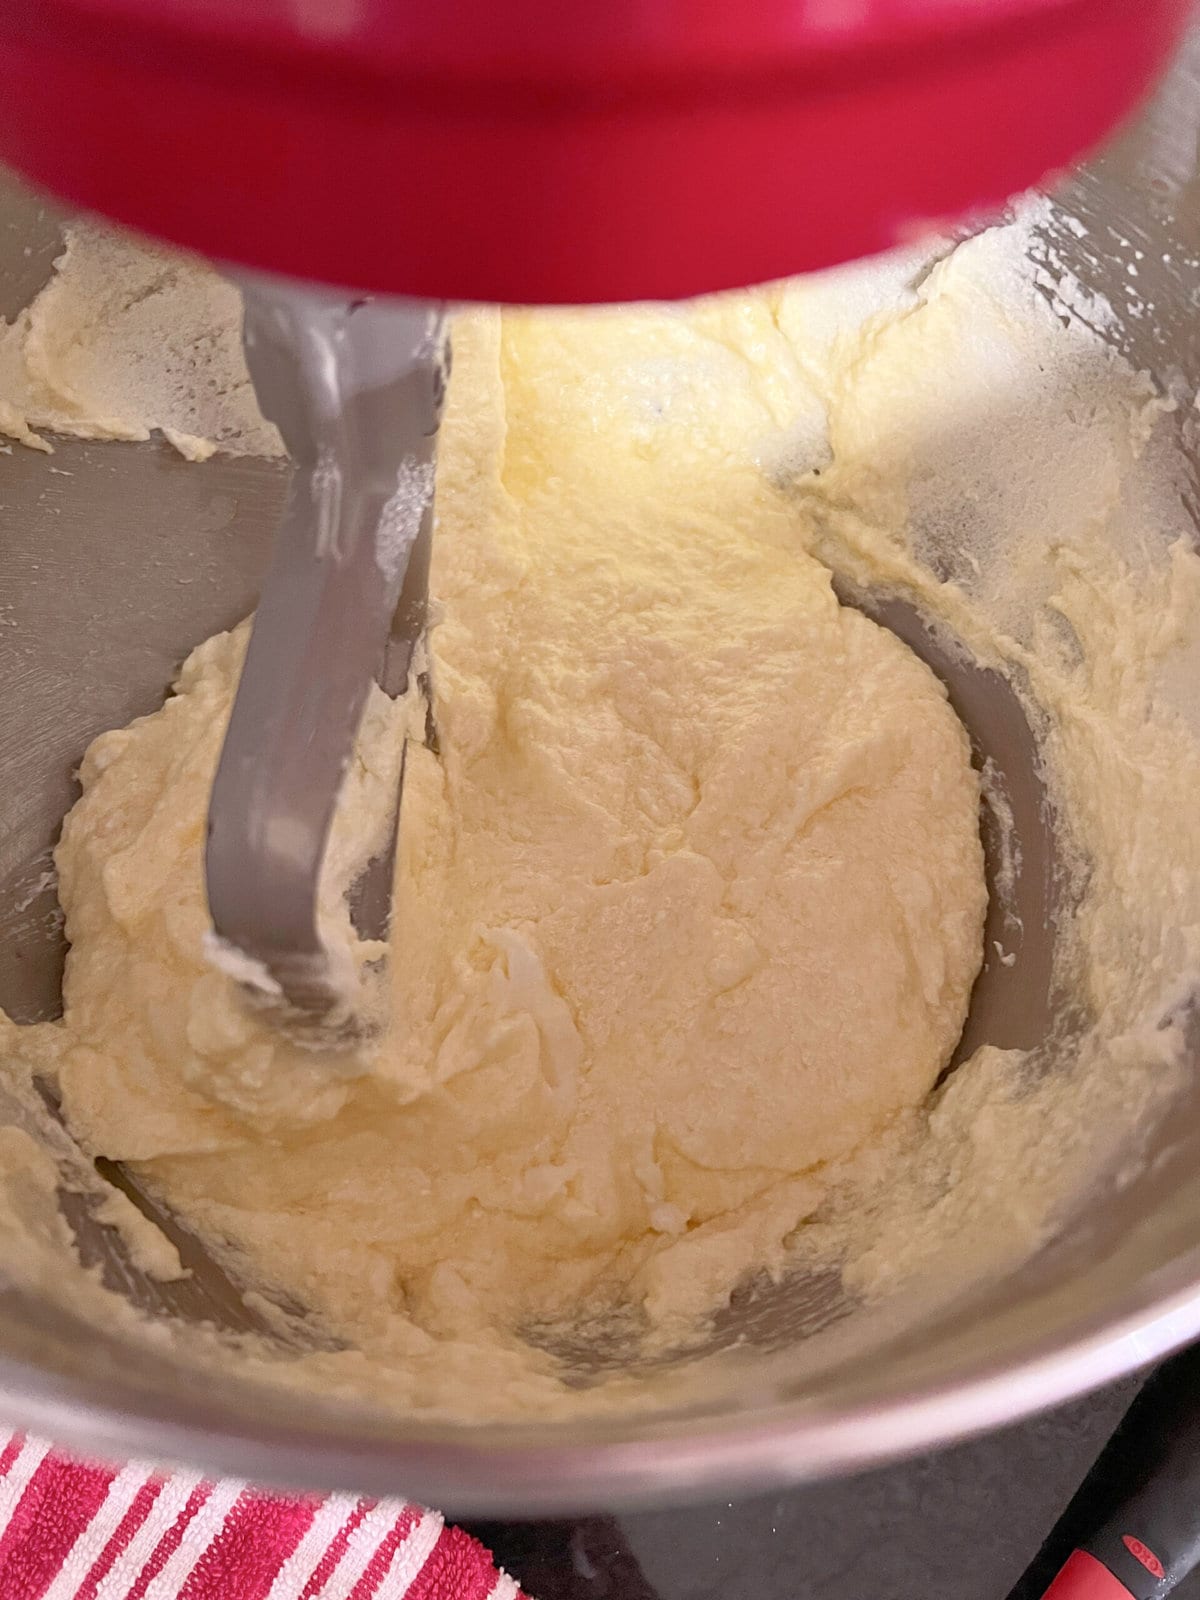 Adding eggs to pound cake batter in mixing bowl.